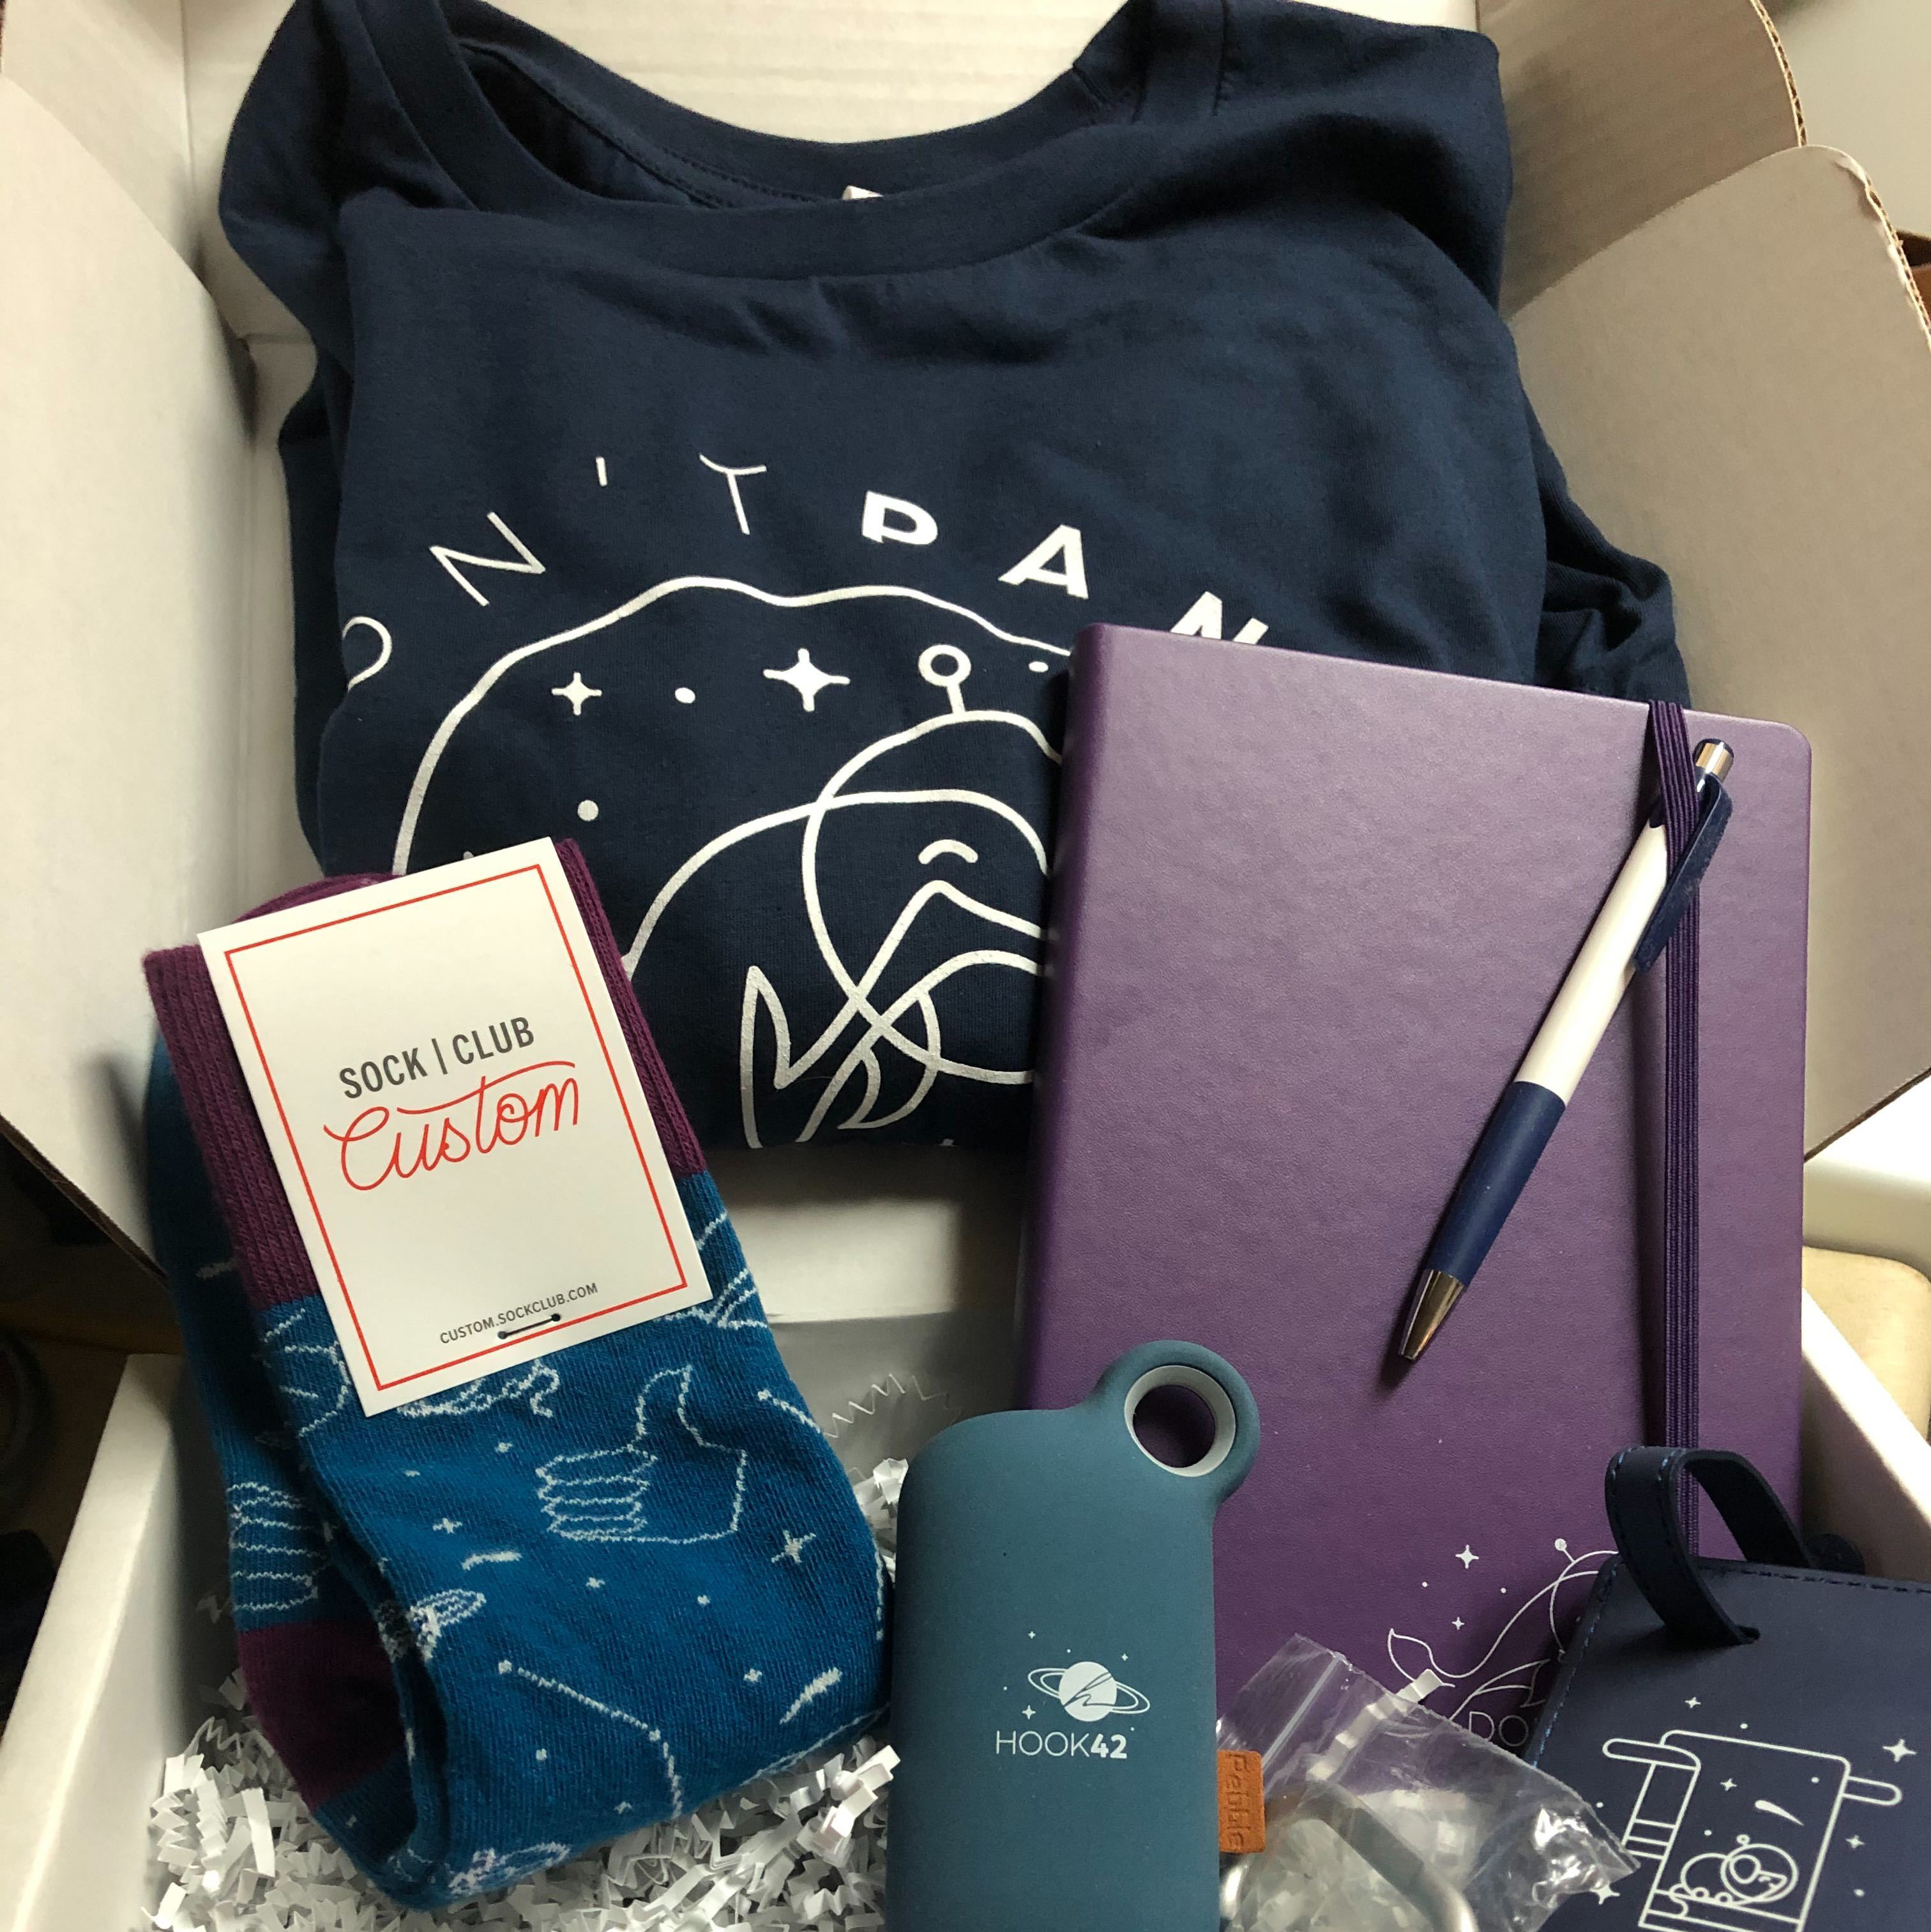 open box displaying h42 branded tshirt socks and notebook